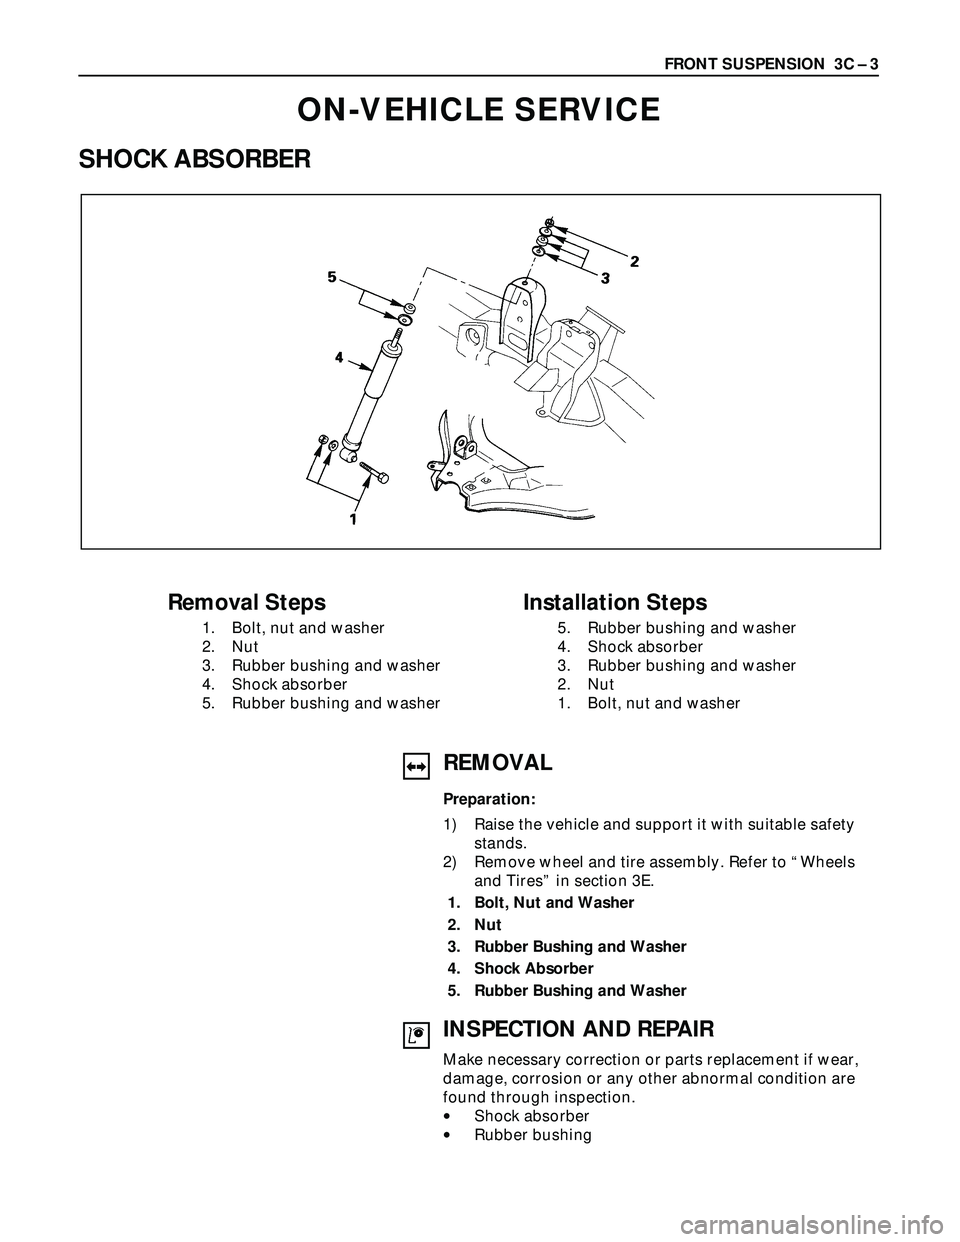 ISUZU TROOPER 1998  Service User Guide FRONT SUSPENSION  3C – 3
ON-VEHICLE SERVICE
SHOCK ABSORBER
Removal Steps
1. Bolt, nut and washer
2. Nut
3. Rubber bushing and washer
4. Shock absorber
5. Rubber bushing and washer
Installation Steps